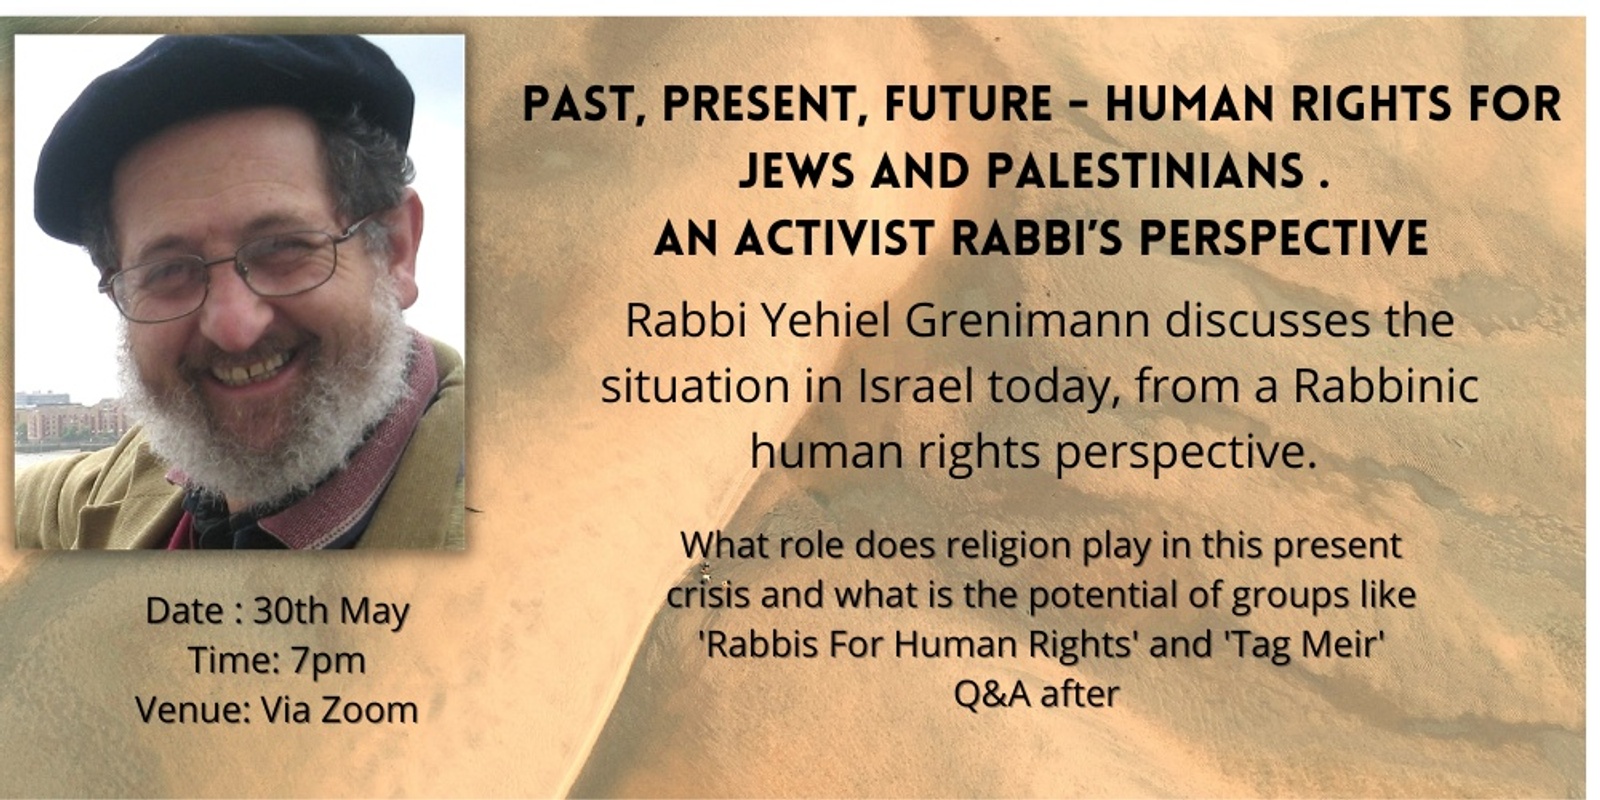 Banner image for Past, Present, Future - Human Rights for Jews and Palestinians . An Activist Rabbi’s Perspective